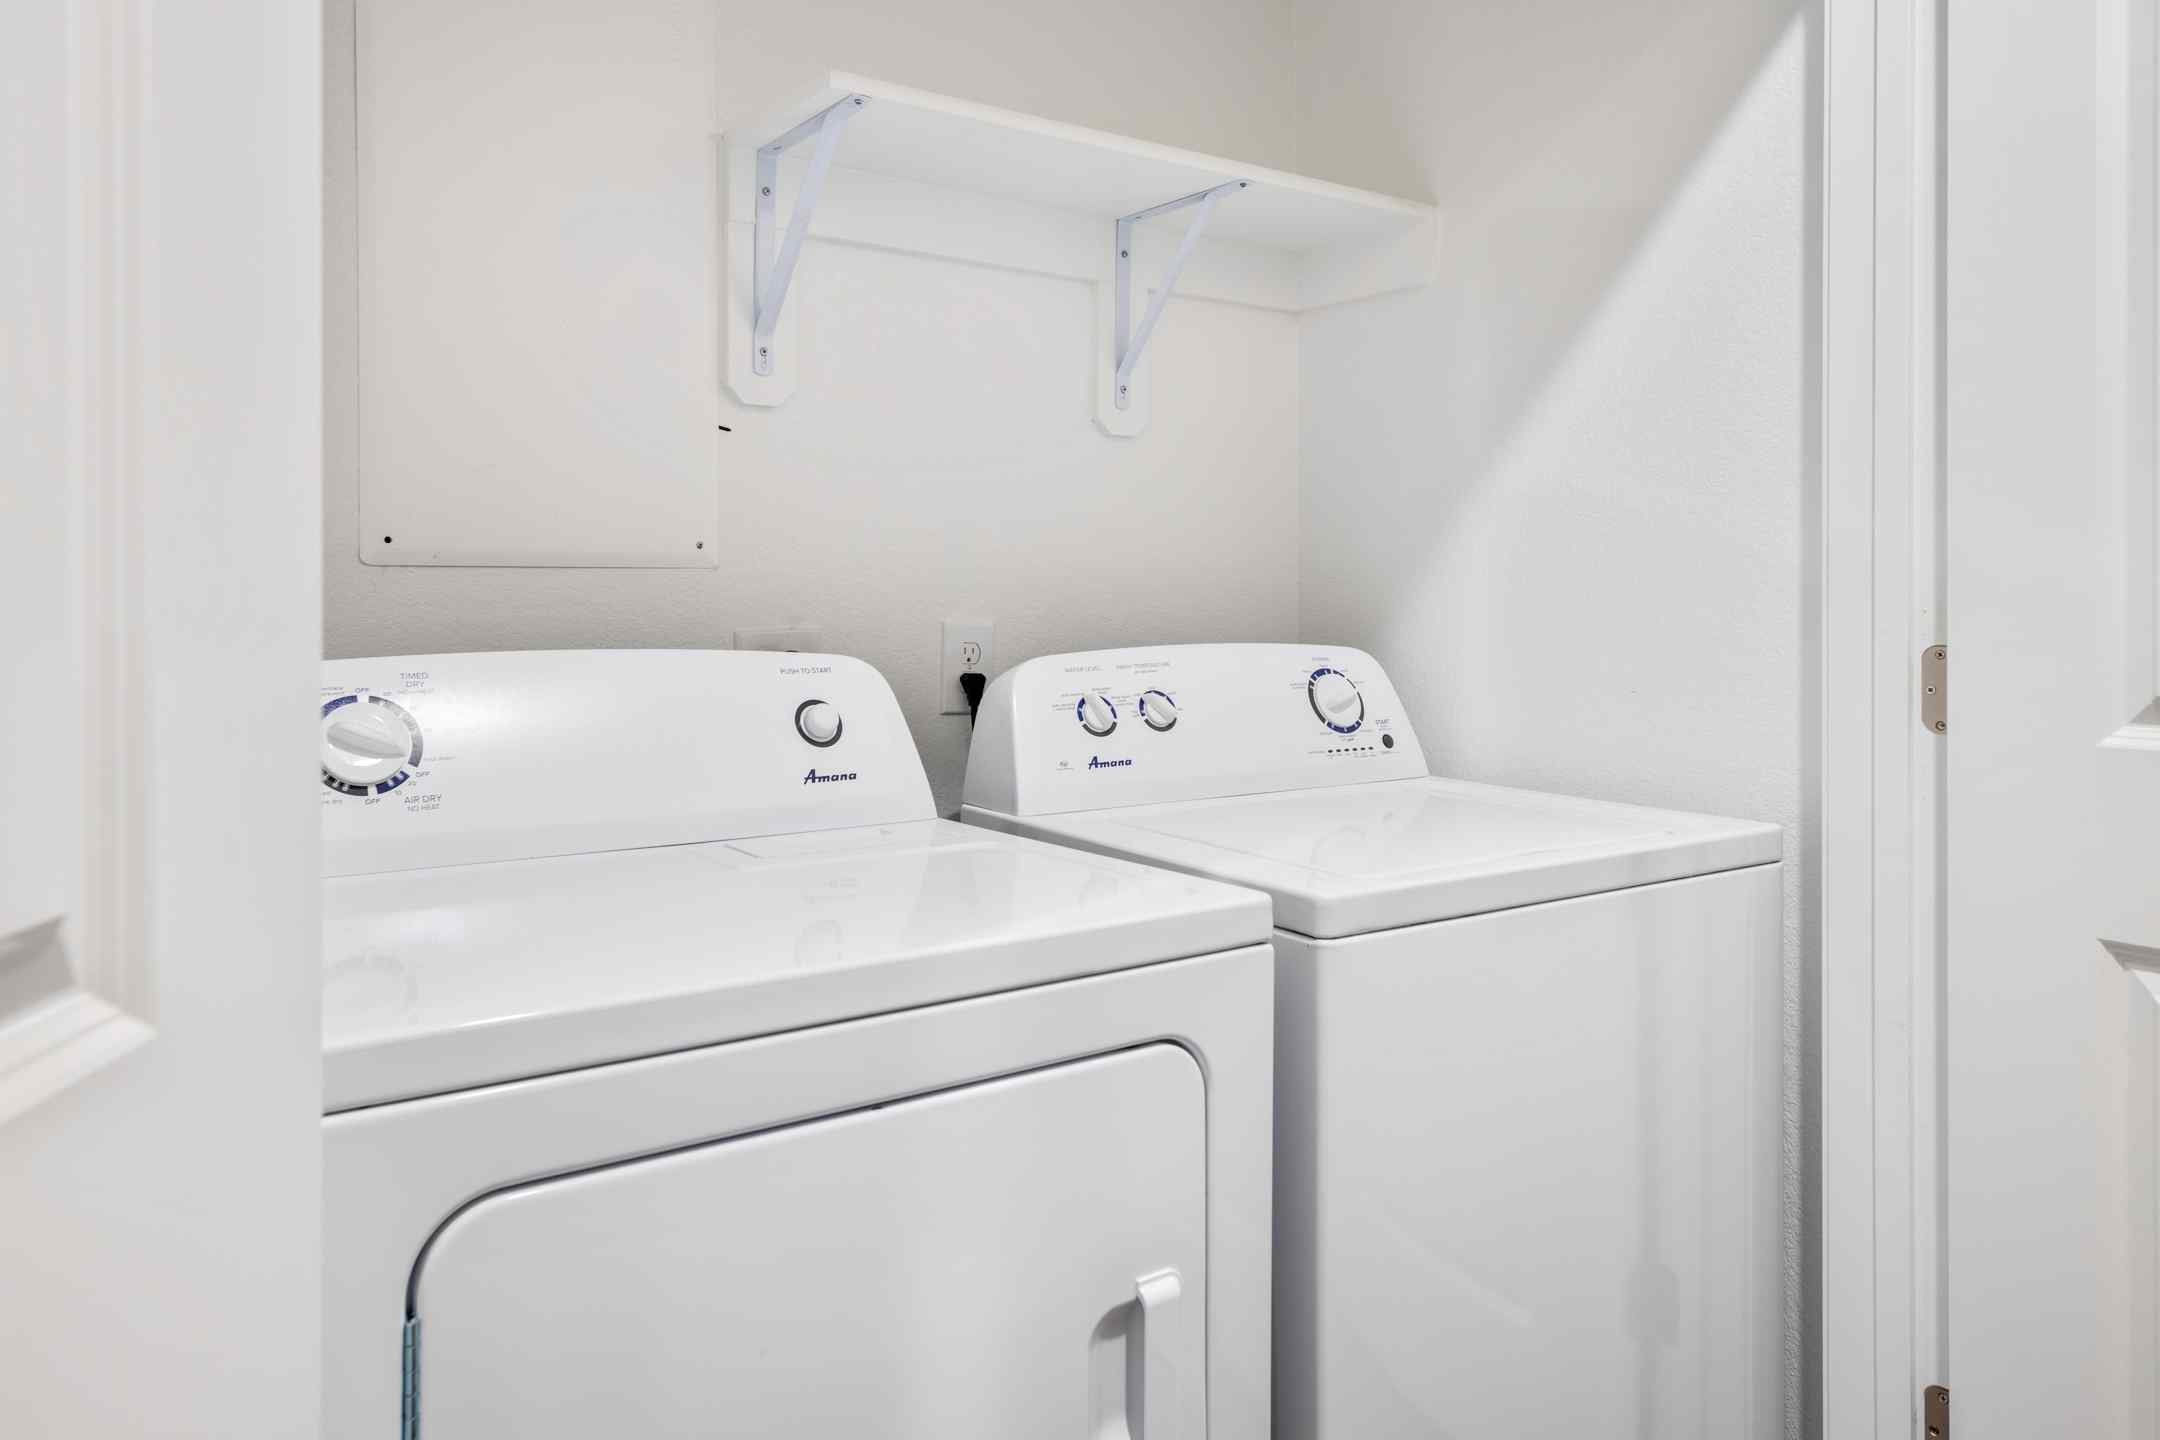 Apartment for student housing is fully equipped with a washer and dryer in a dedicated closet.